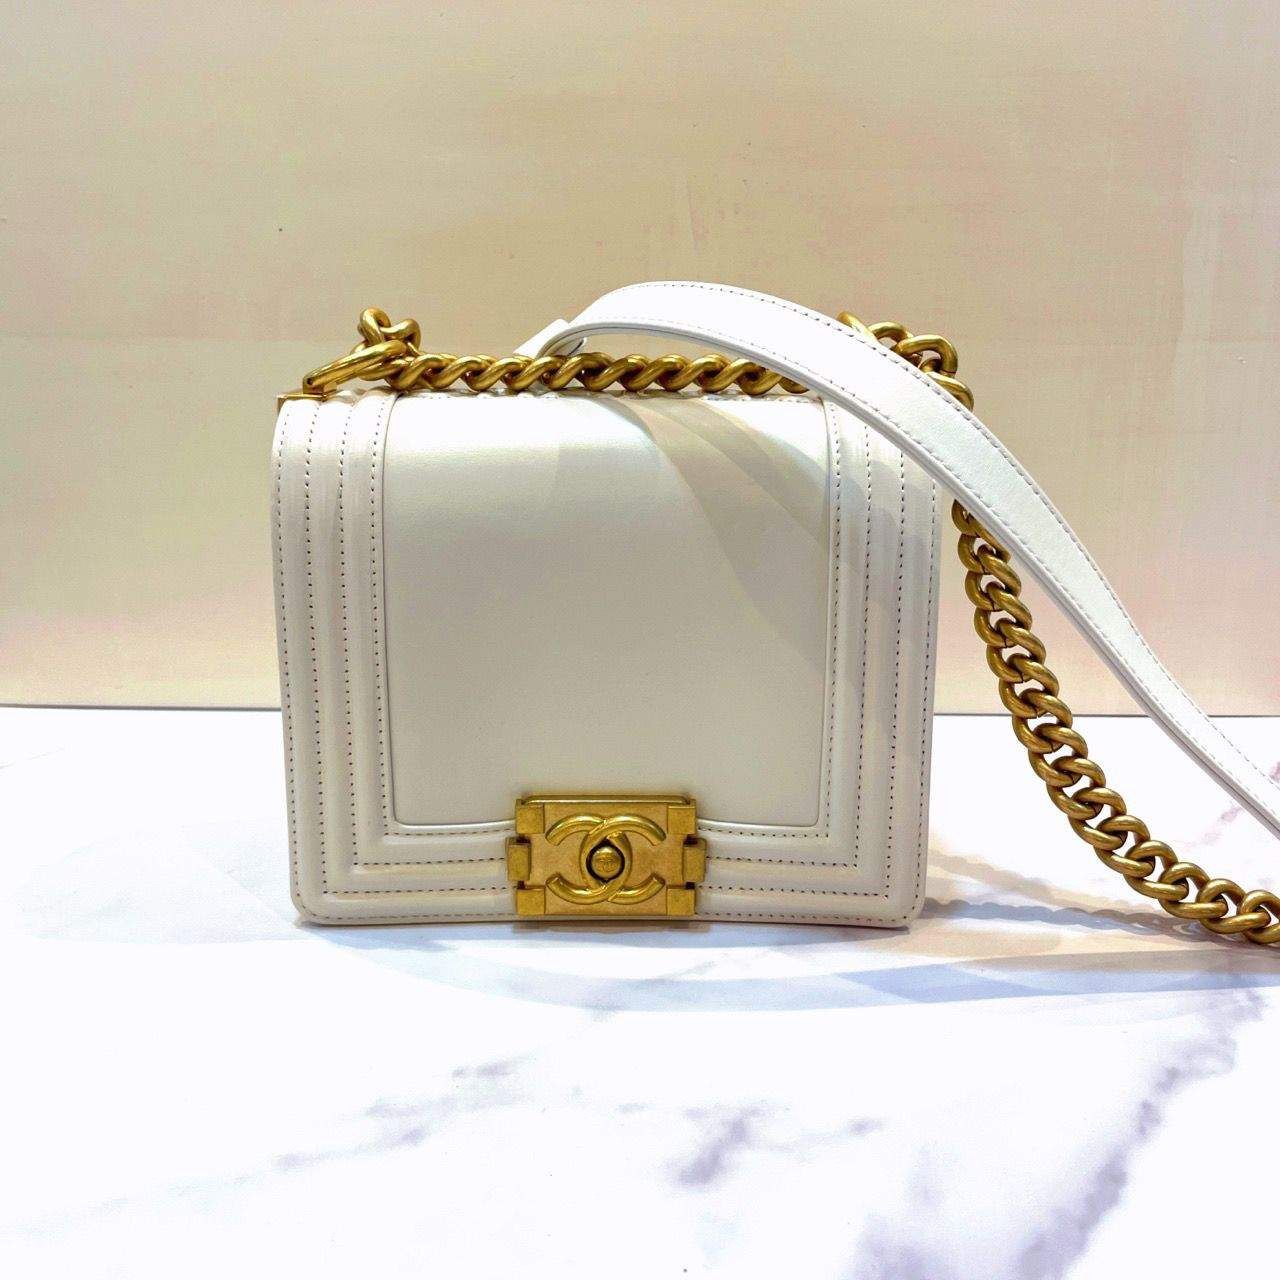 Wallet on chain - Pearly grained calfskin & gold-tone metal, white